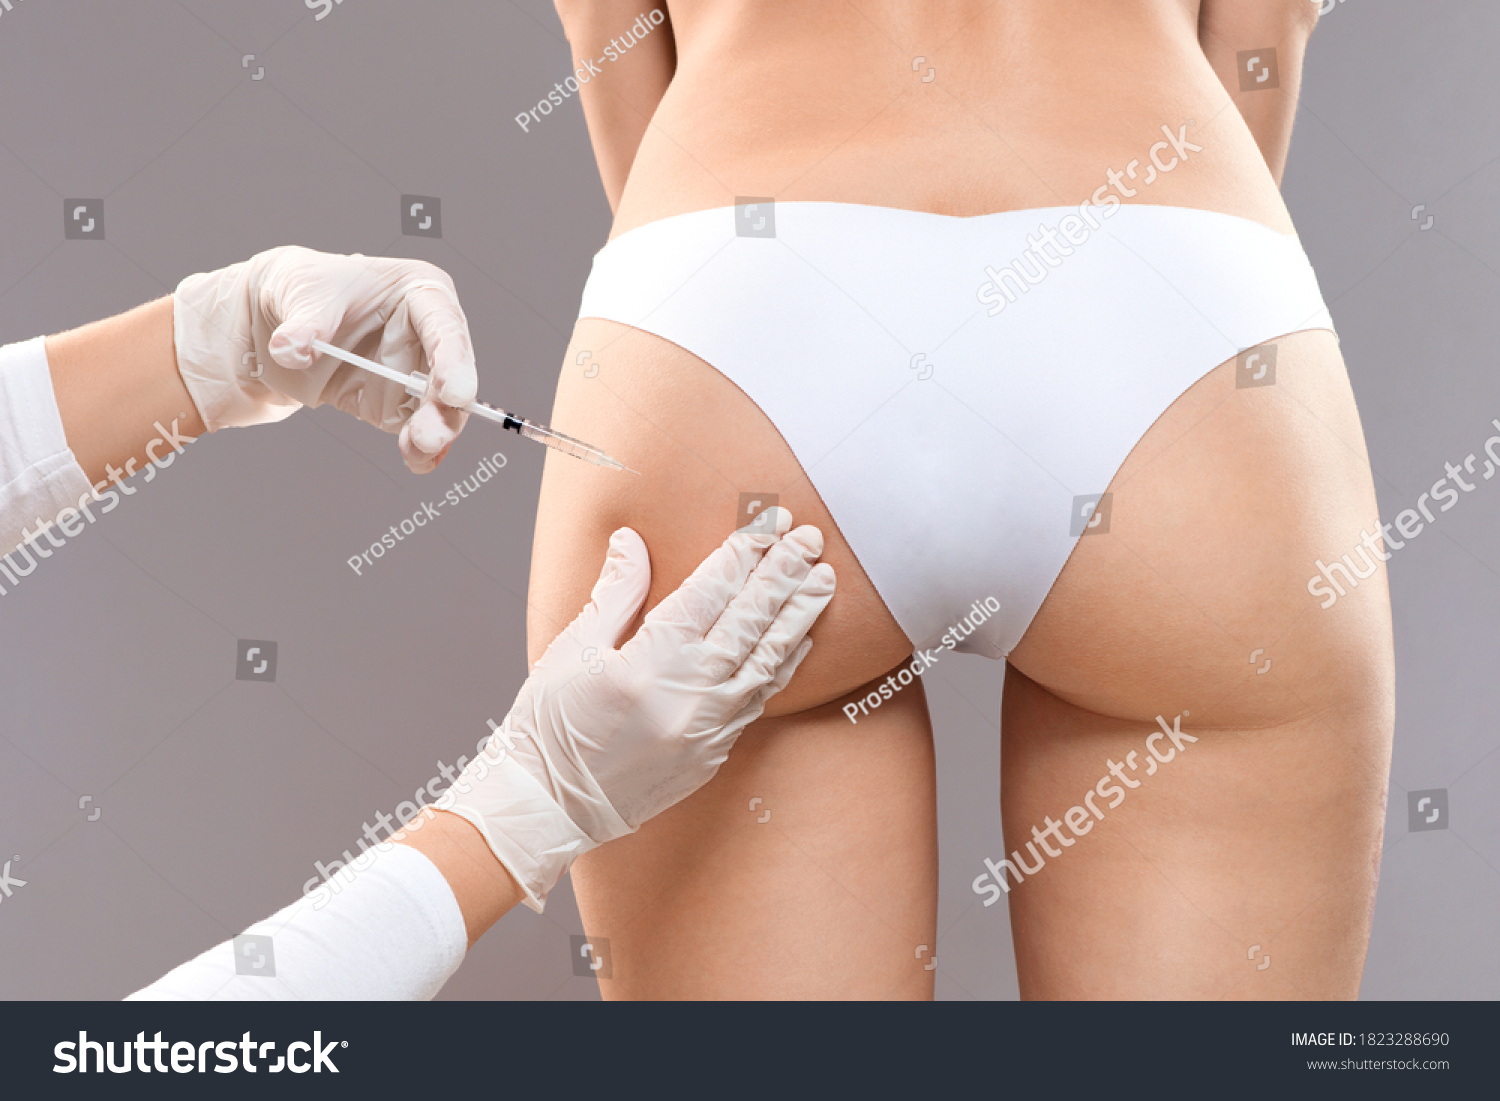 Sculptra butt lifting concept. Slim woman having hip injection at beauty salon, closeup. Plastic surgeon making injection at butt area for unrecognizable lady, grey studio background, back view #1823288690